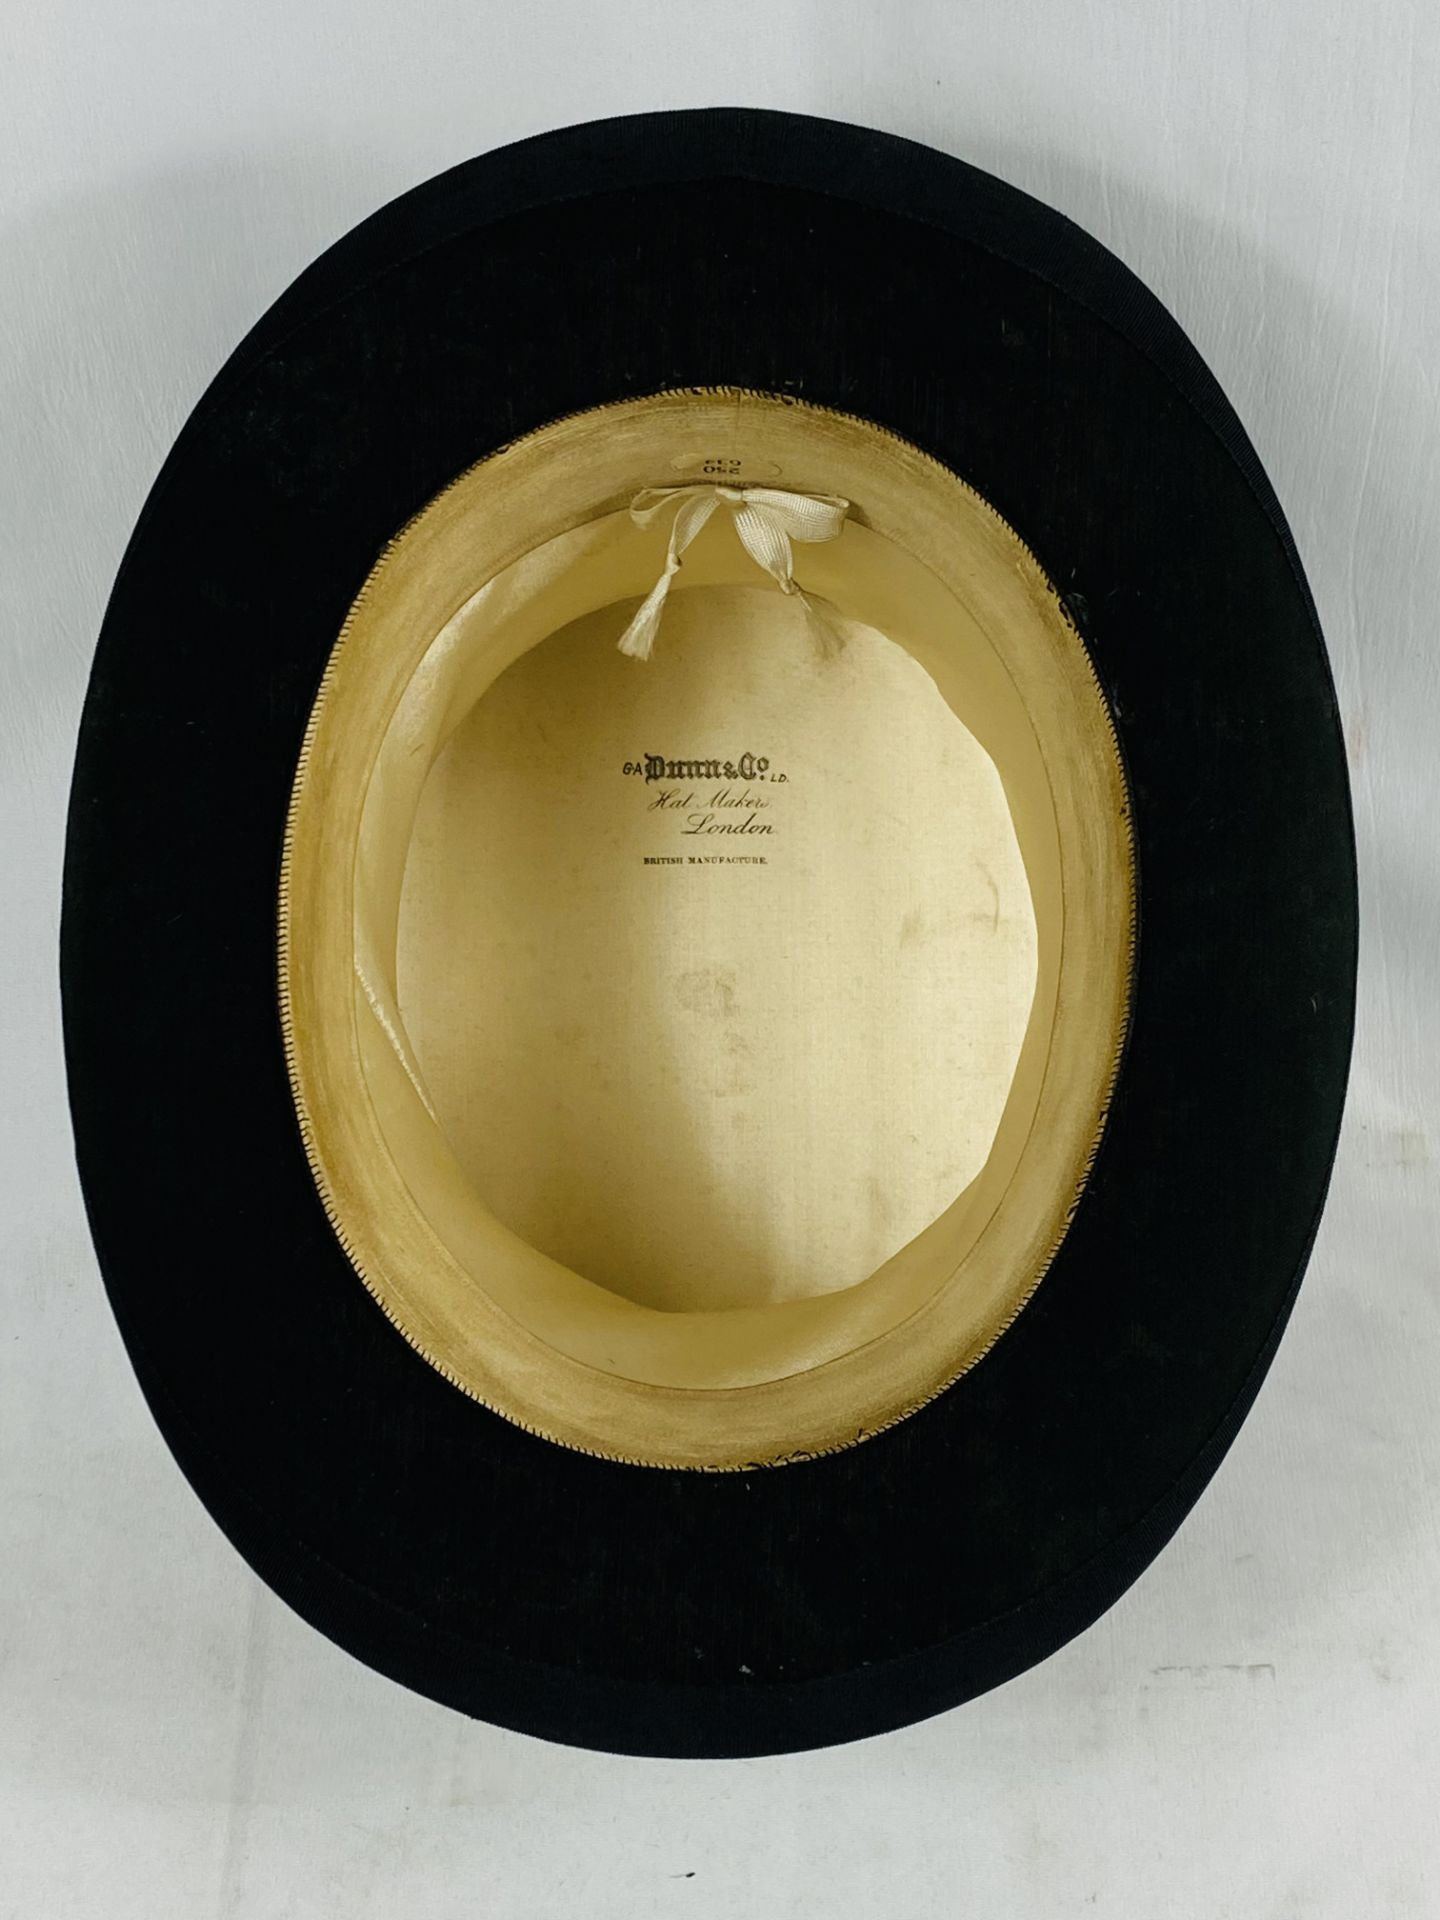 Dunn & Co childs silk top hat - Image 5 of 7